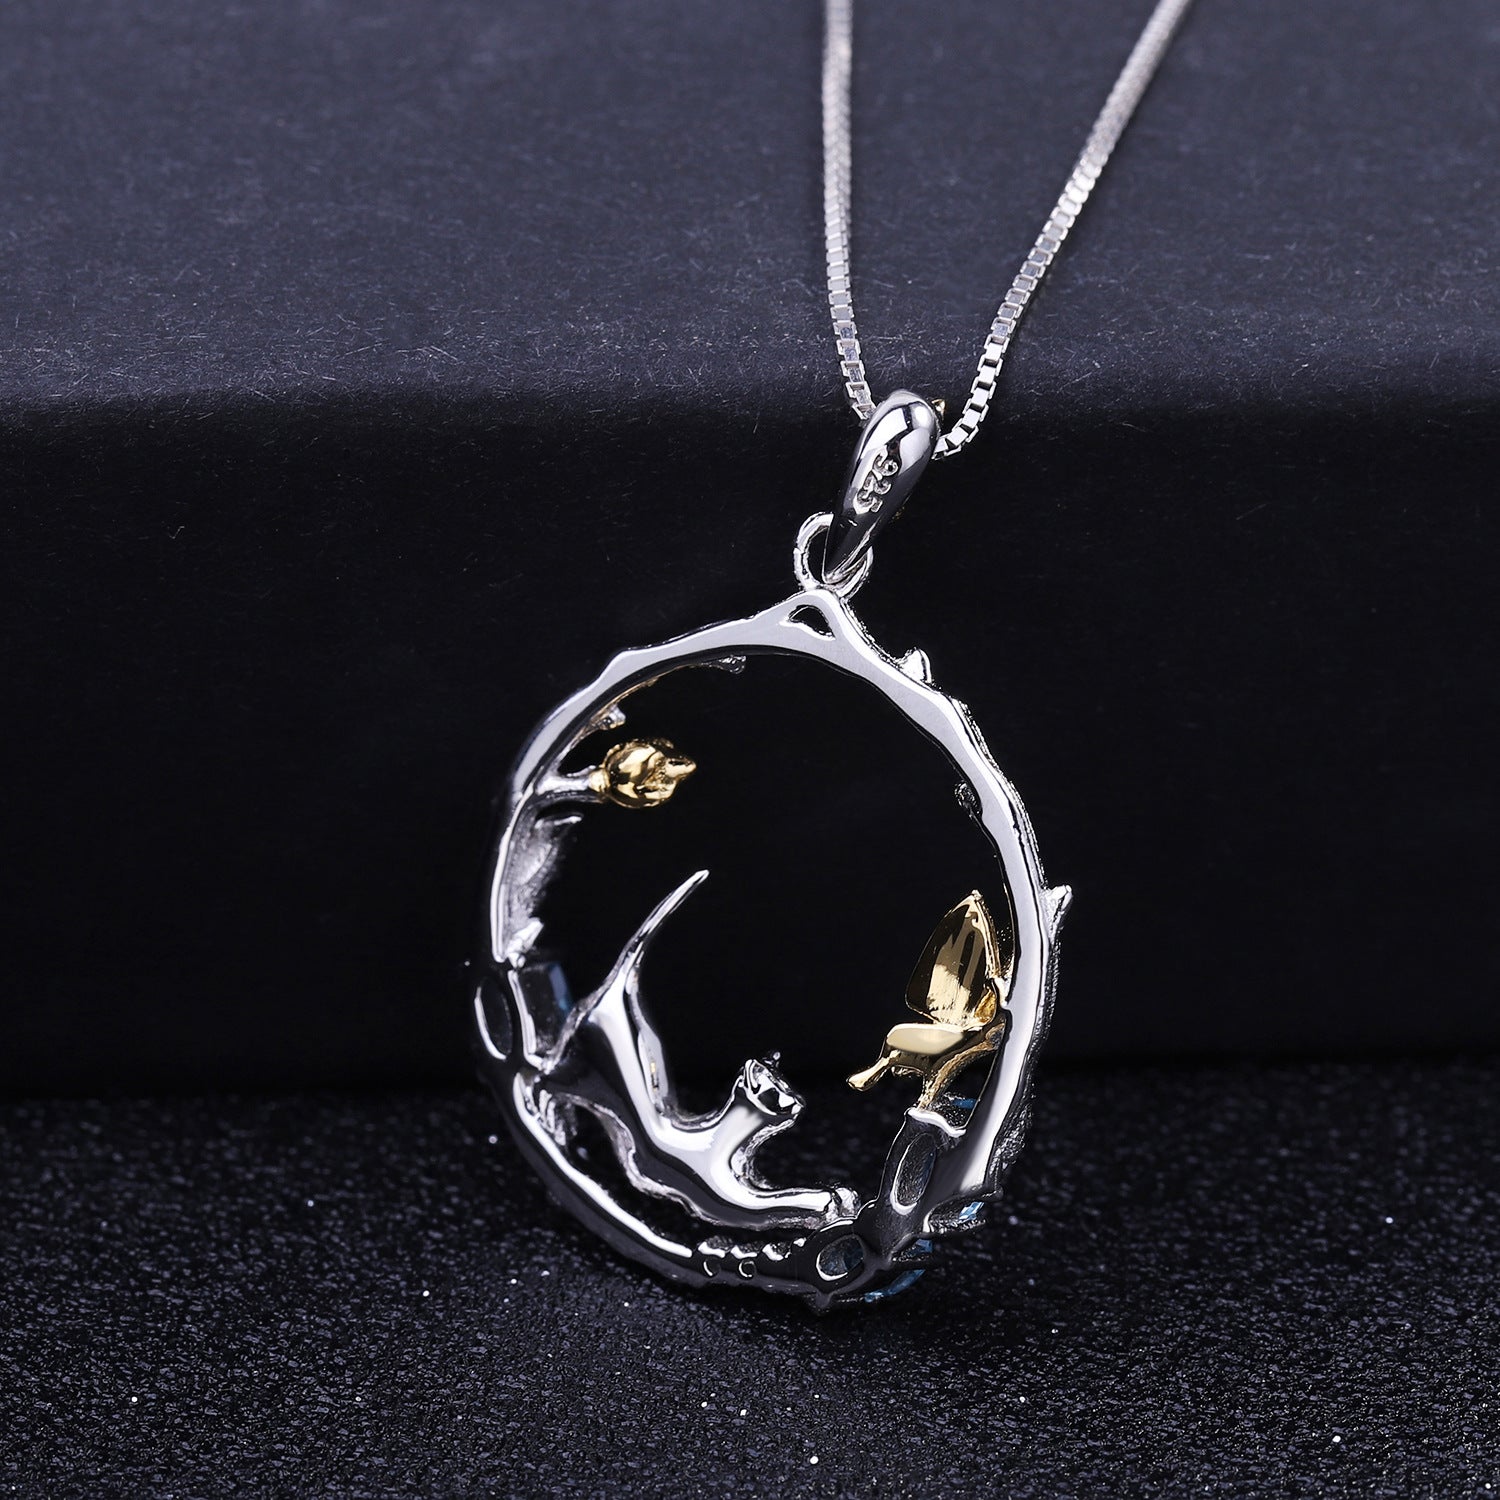 National Style Animal Design Natural Topaz Cat and Butterfly Pendant Silver Necklace for Women